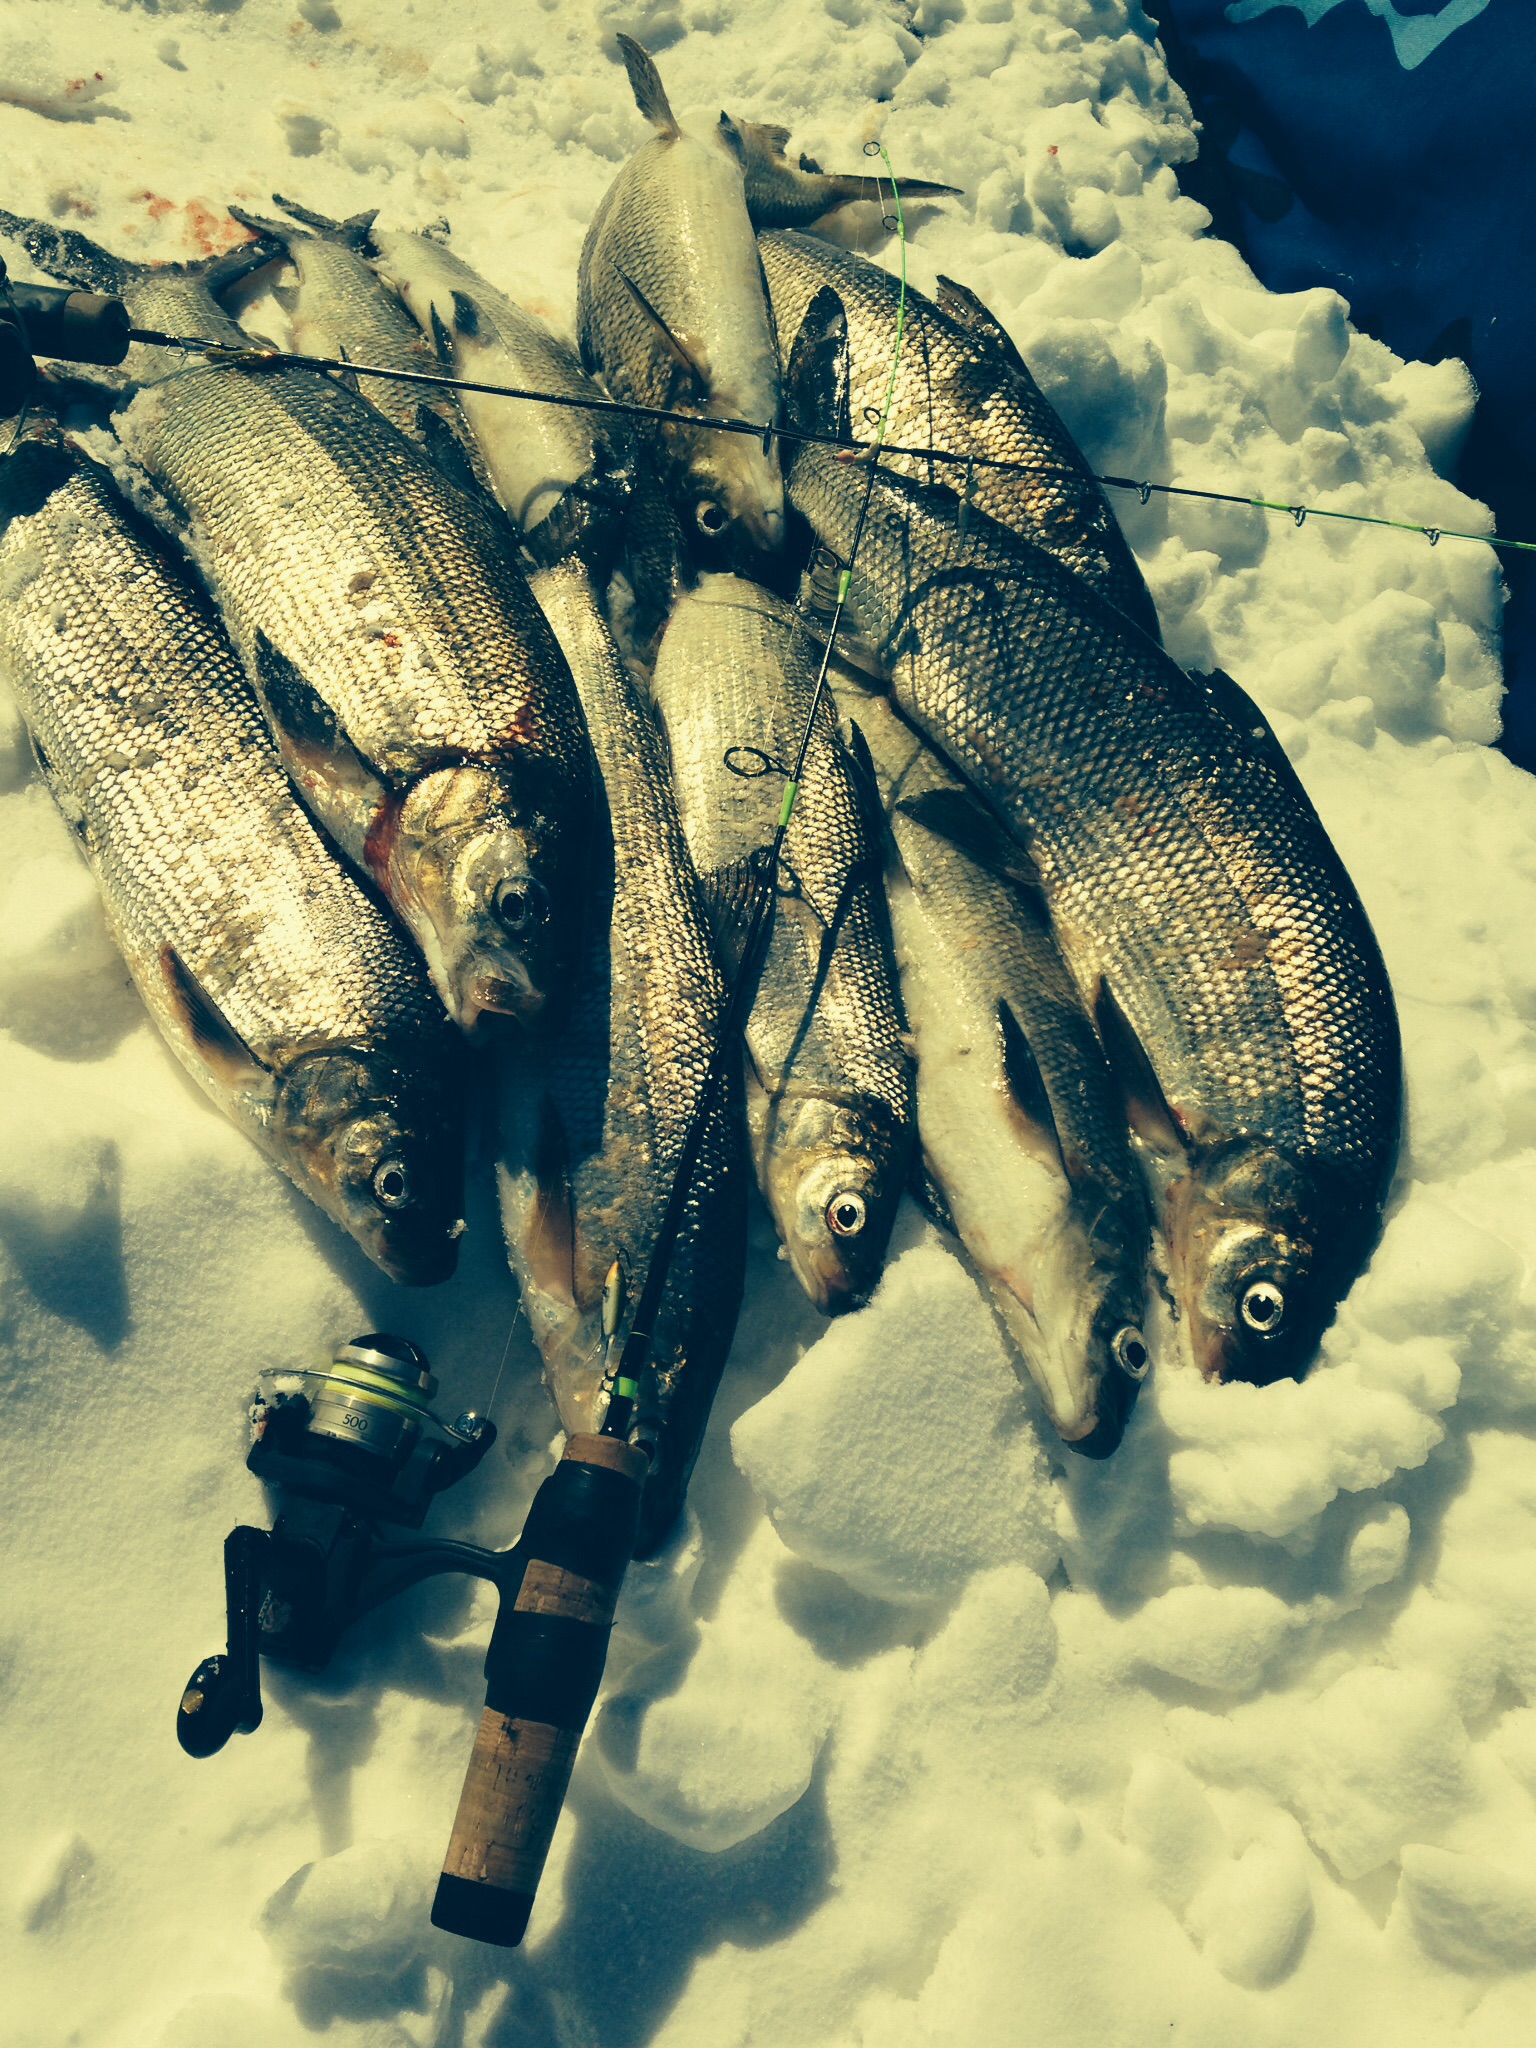 Whitefish info. …..tackle, rods, etc - Ice Fishing Forum - Ice